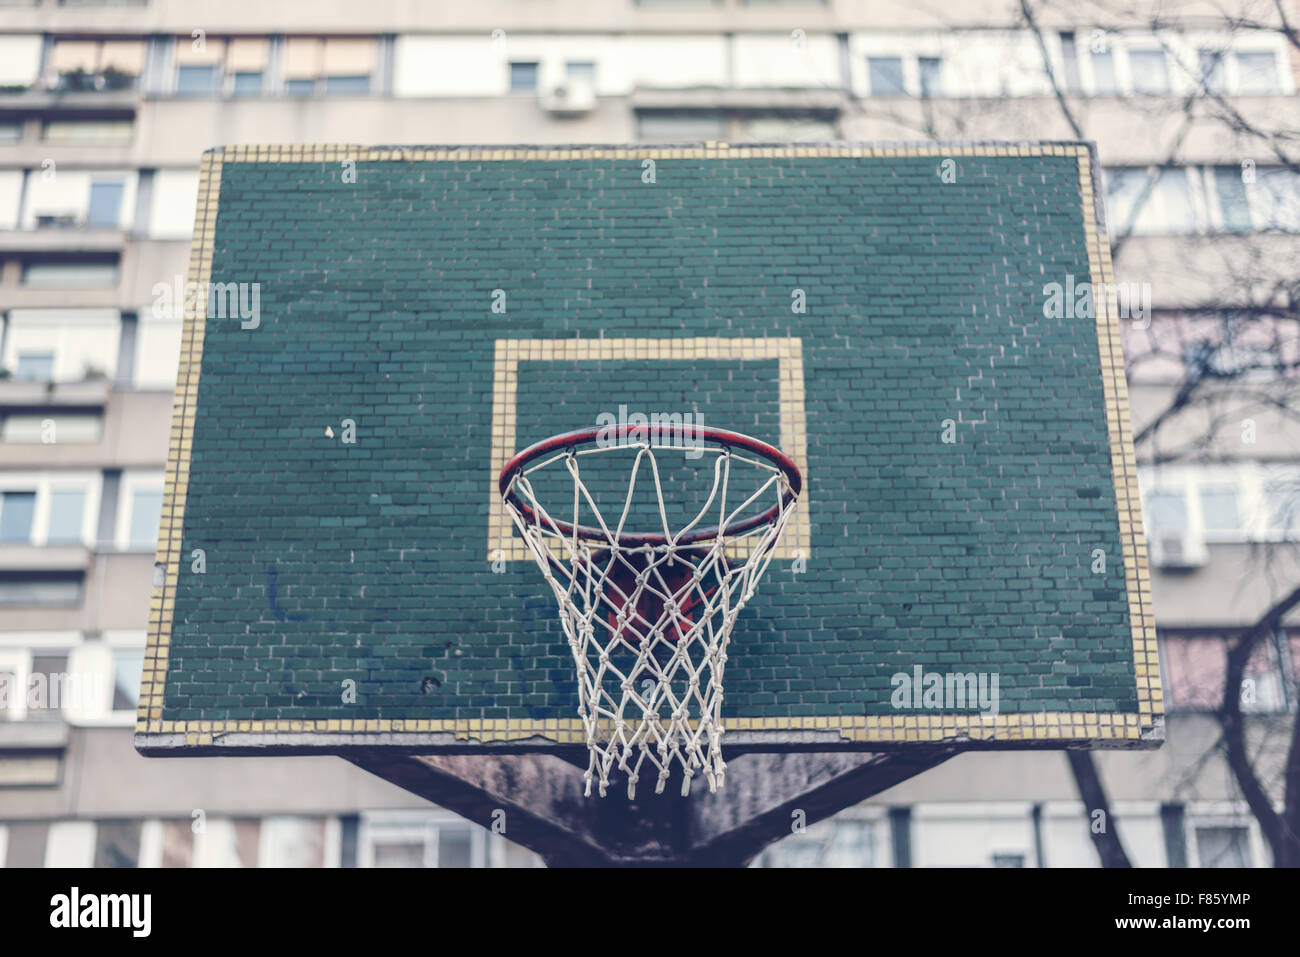 Basketball hoop with backboard in residential district for street basketball game, outdoors sports and recreation, urban environ Stock Photo